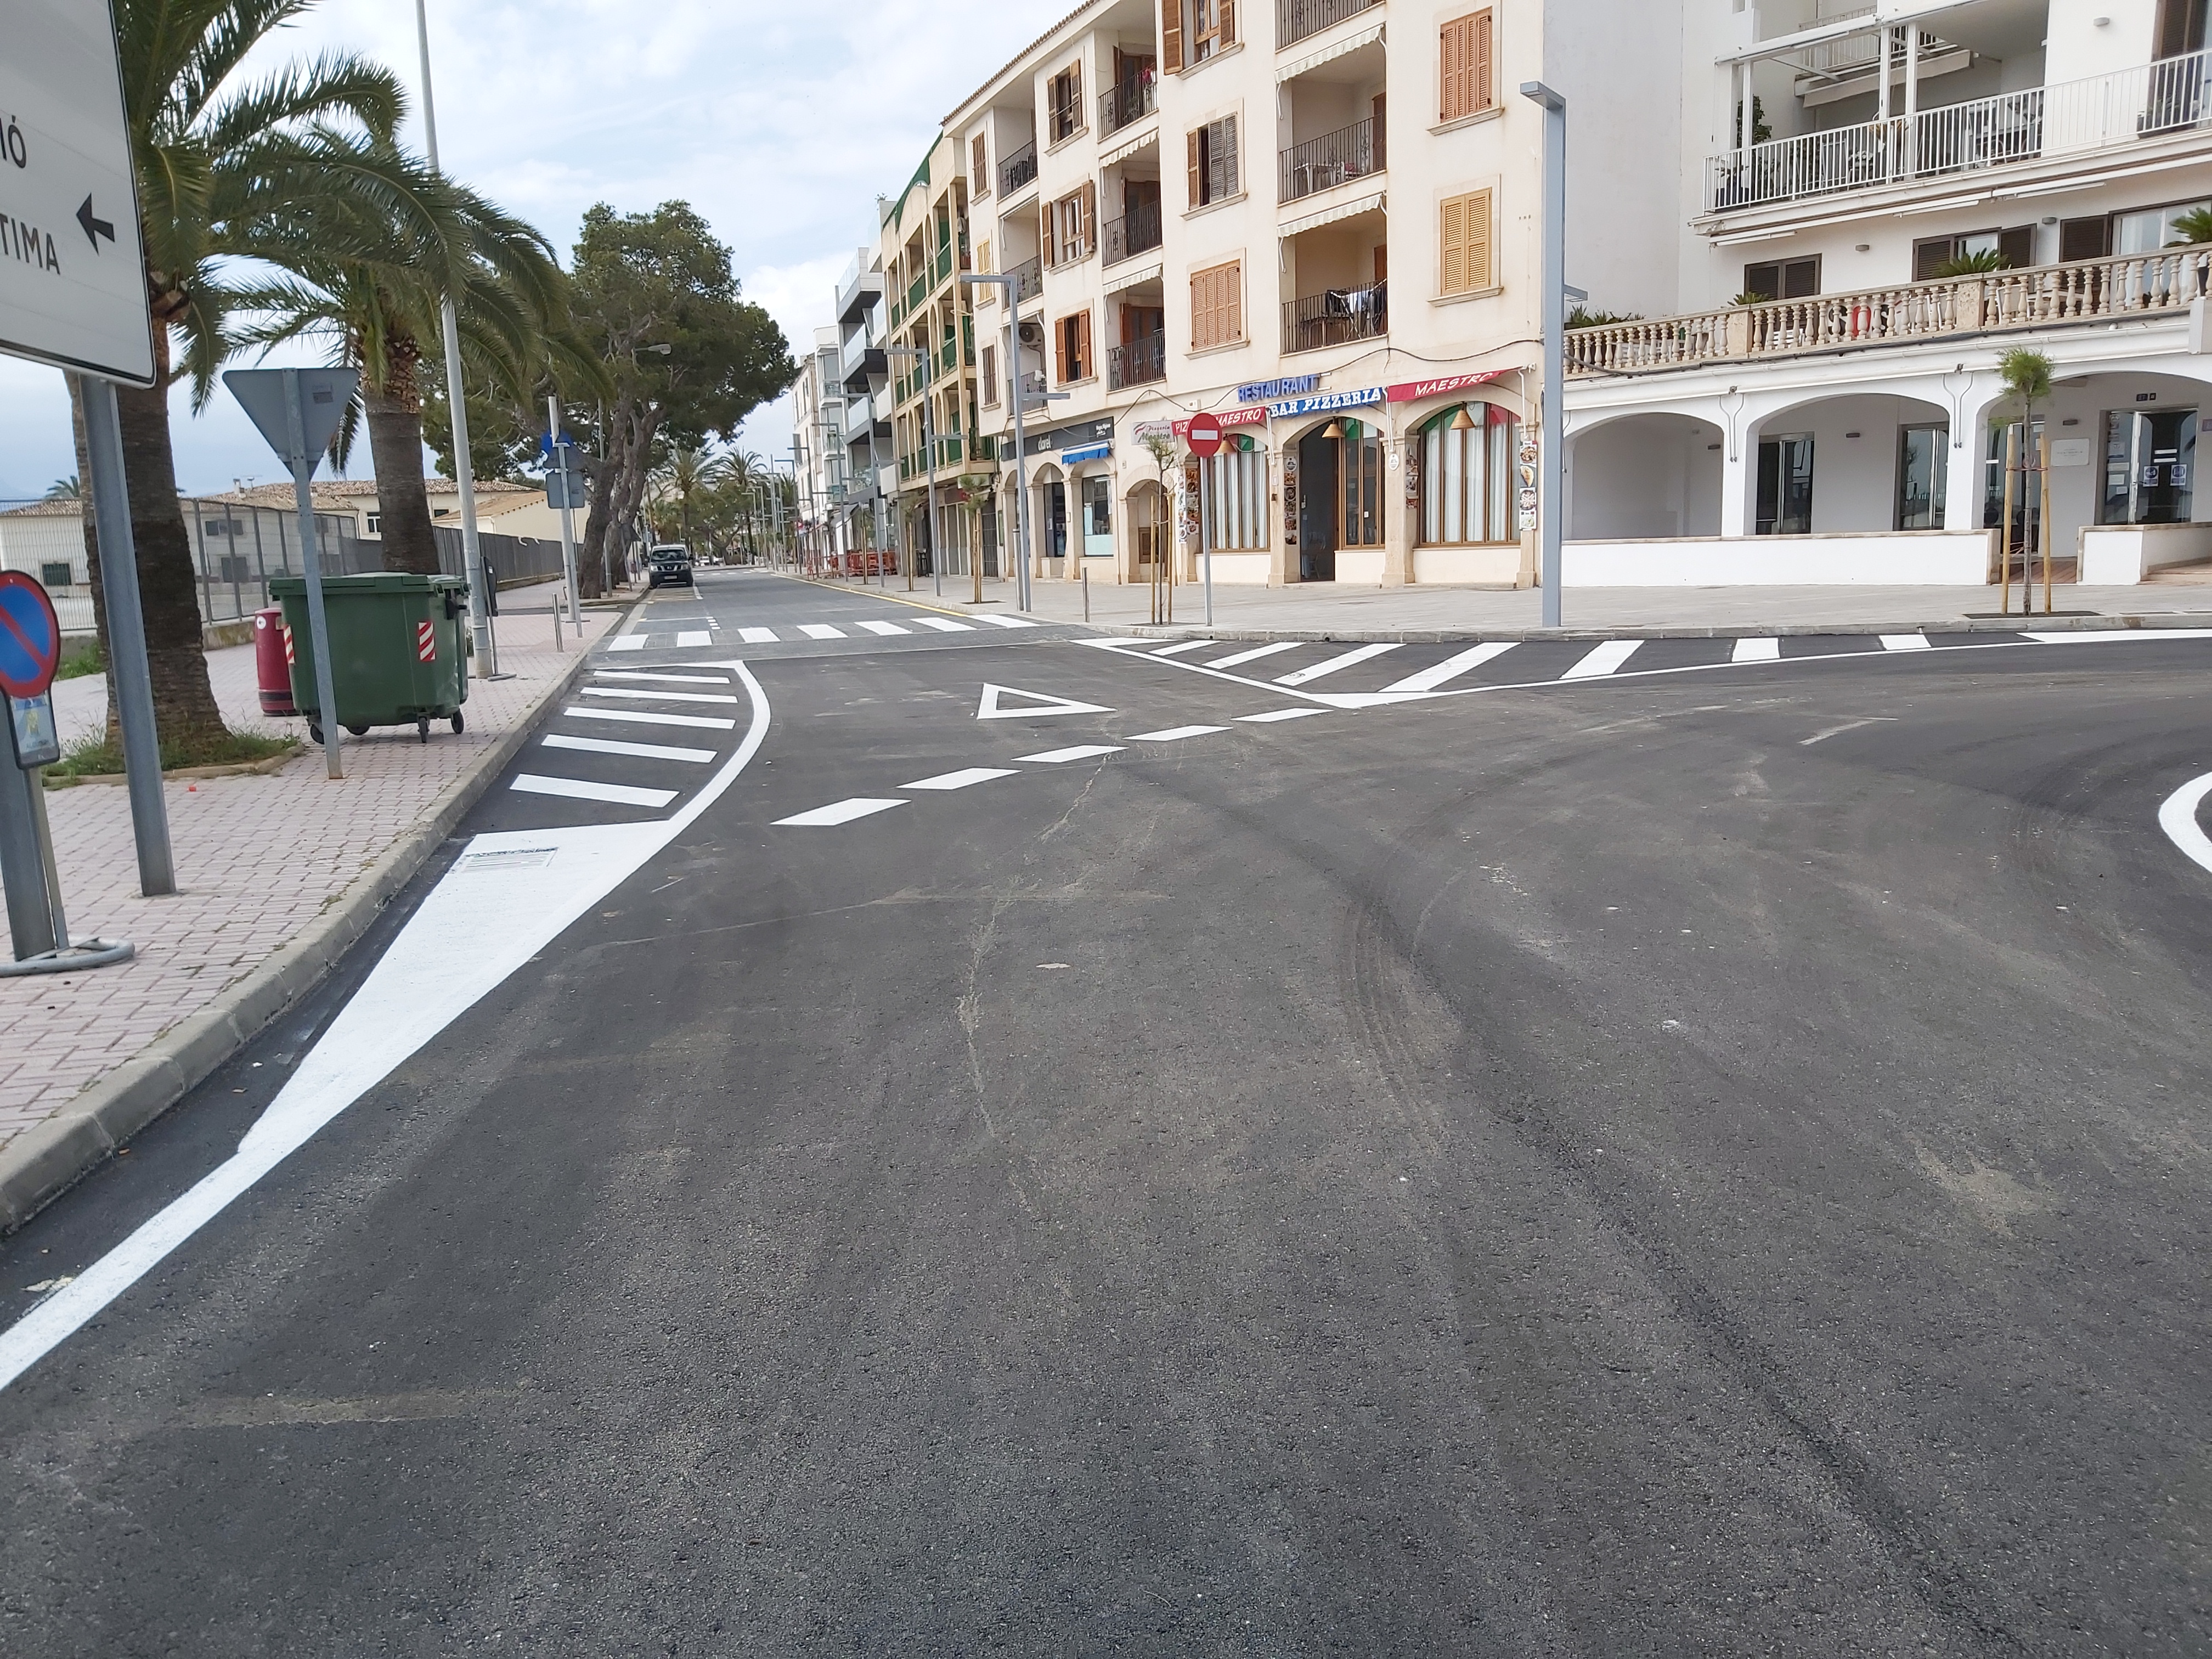 The section of Teodor Canet and Gabriel Roca streets in the port of Alcúdia is open to the public